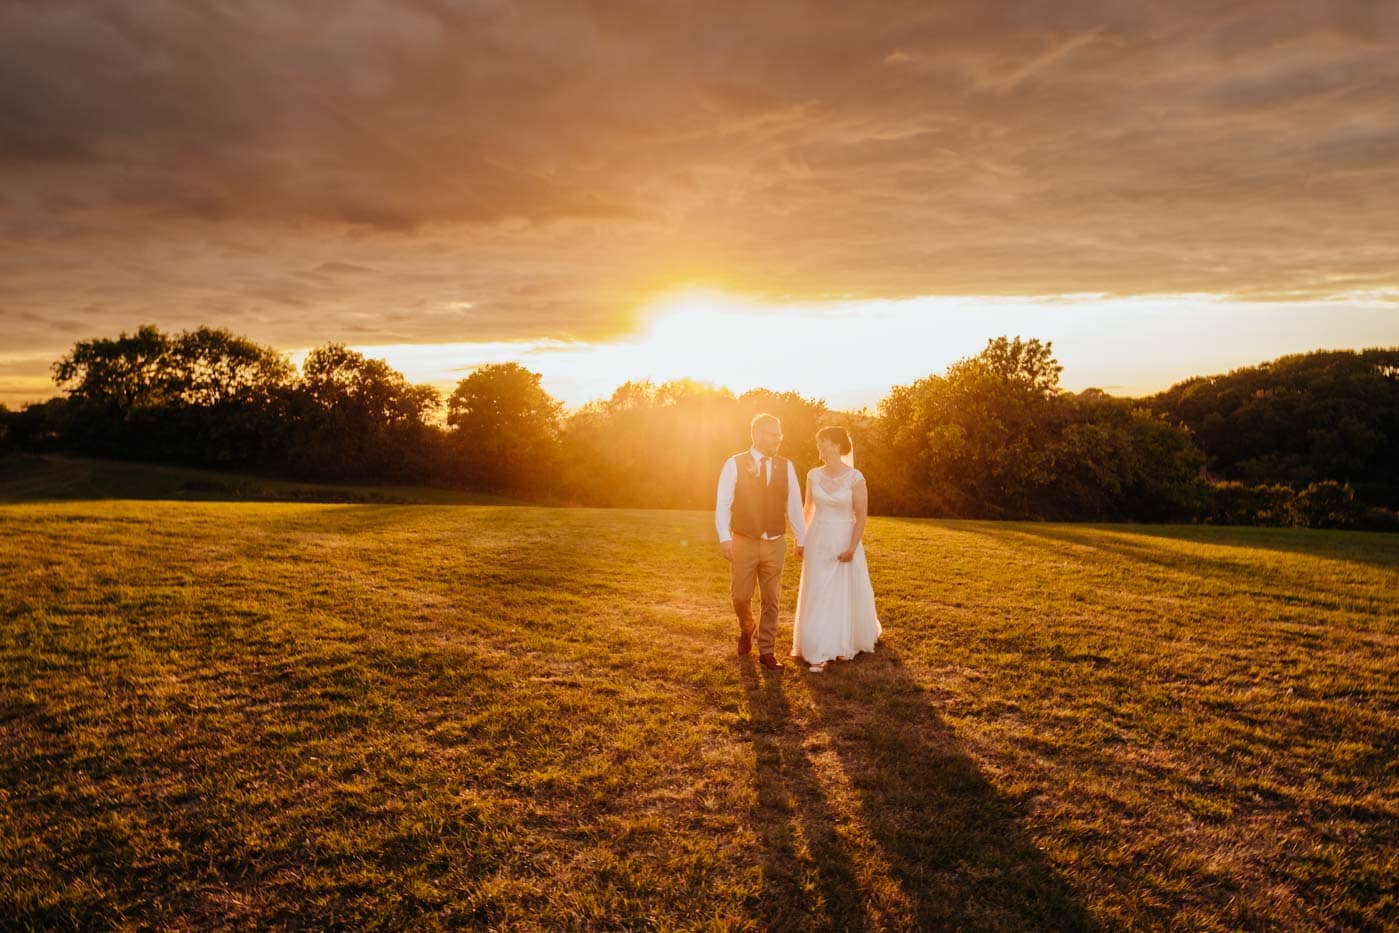 Bride and groom during golden hour after their outdoor wedding ceremony